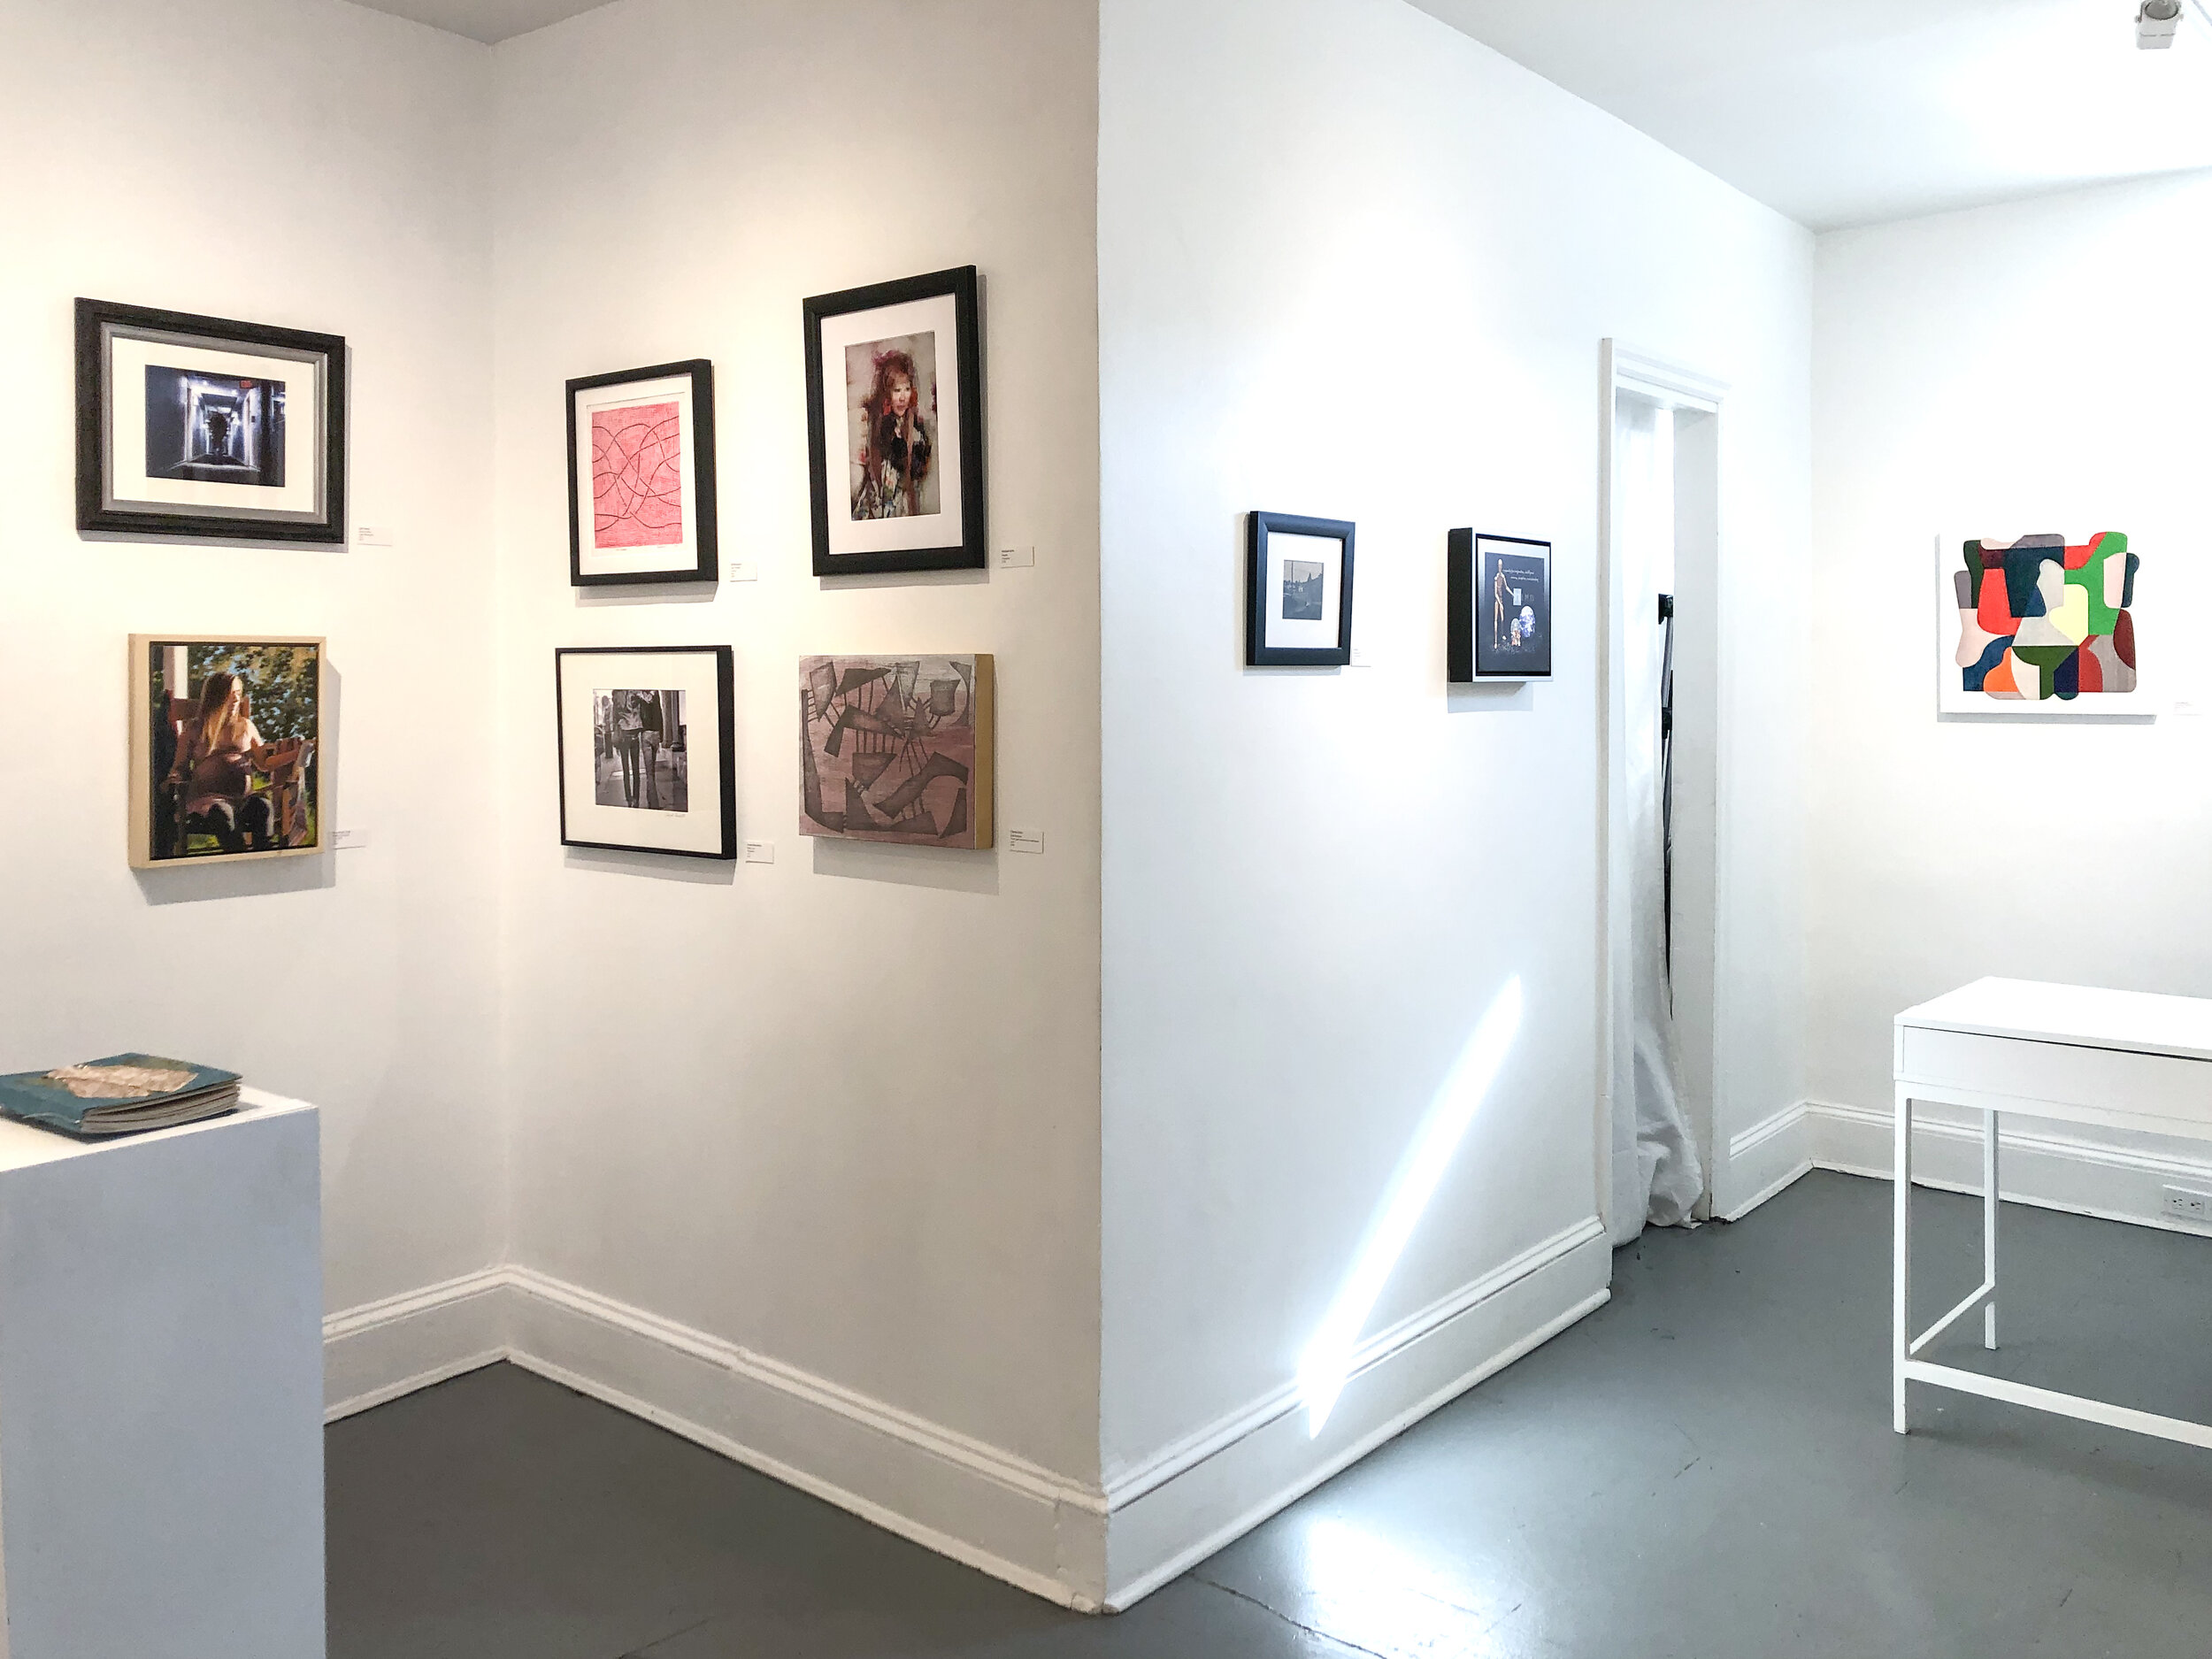  Art gallery in Philadelphia presents a new exhibition in their Bella Vista location with works for sale through SHOP DVAA. 